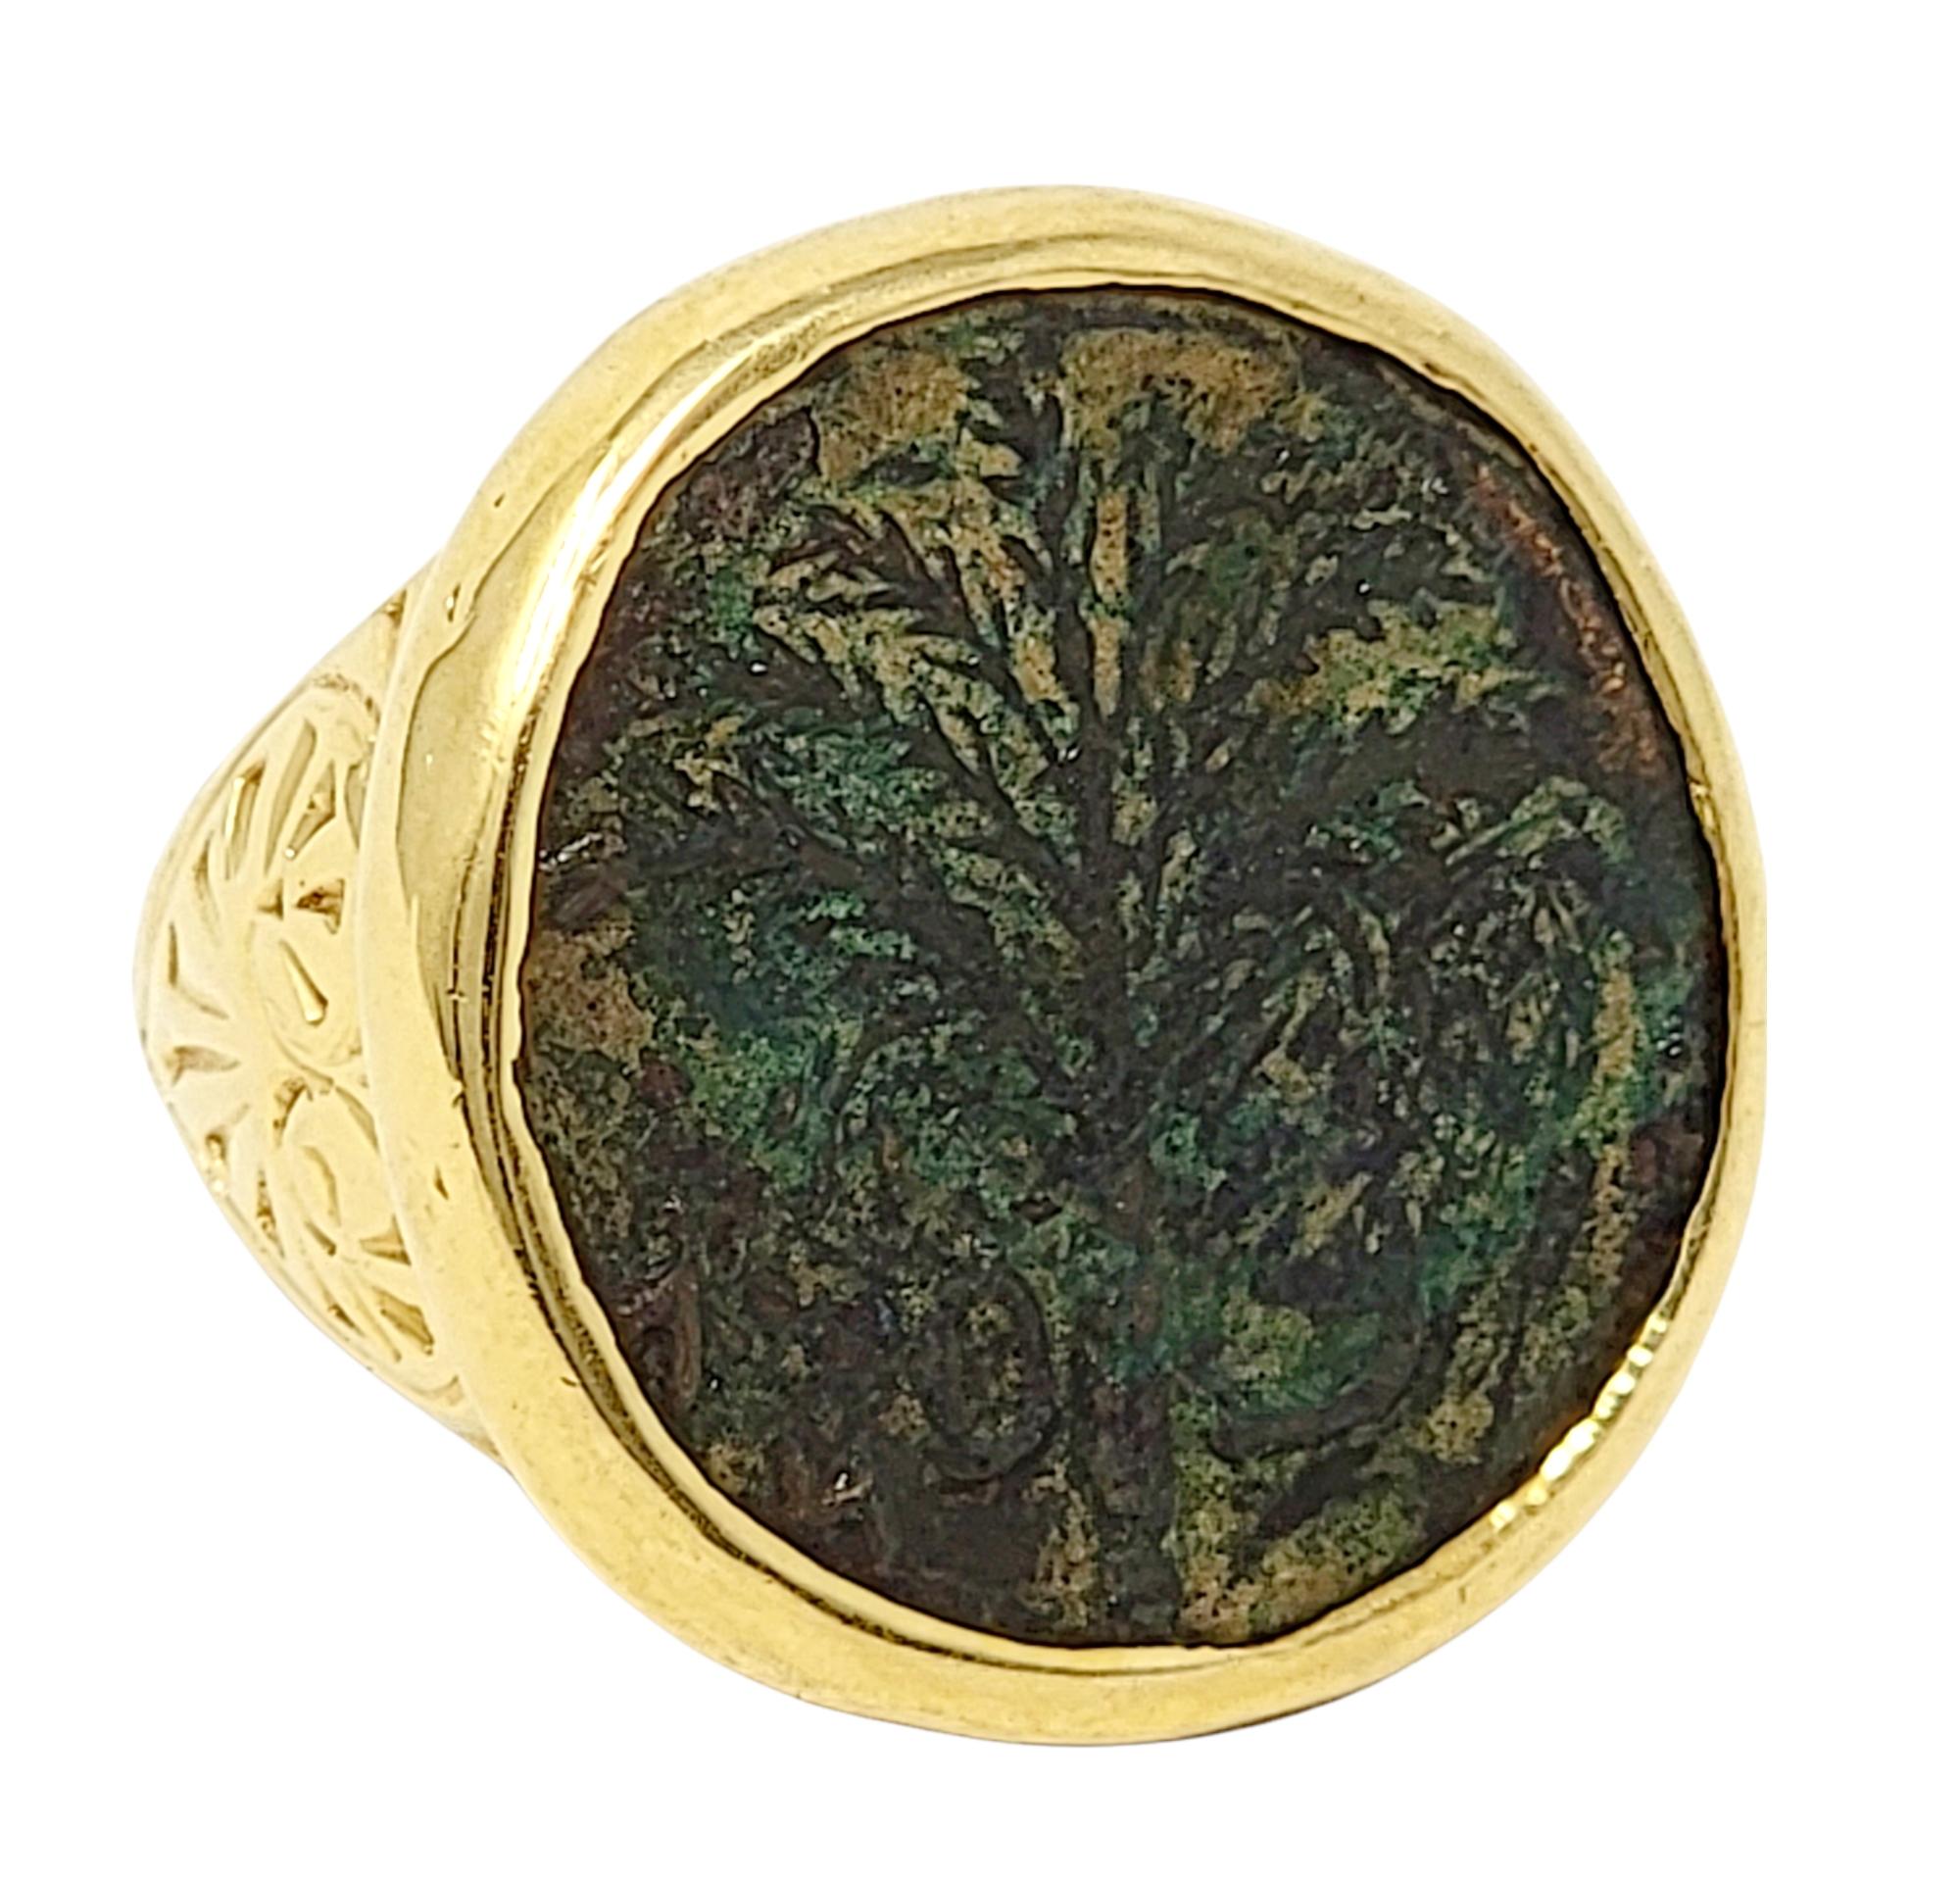 Ring size: 8.5

Show off an incredible piece of history set in a stunning ancient coin ring! This rare, bronze Barakat Shim'on Bar-Kochba coin from 132-135 CE is beautifully detailed with a symbolic 7 front palm tree motif.  The intricate detail